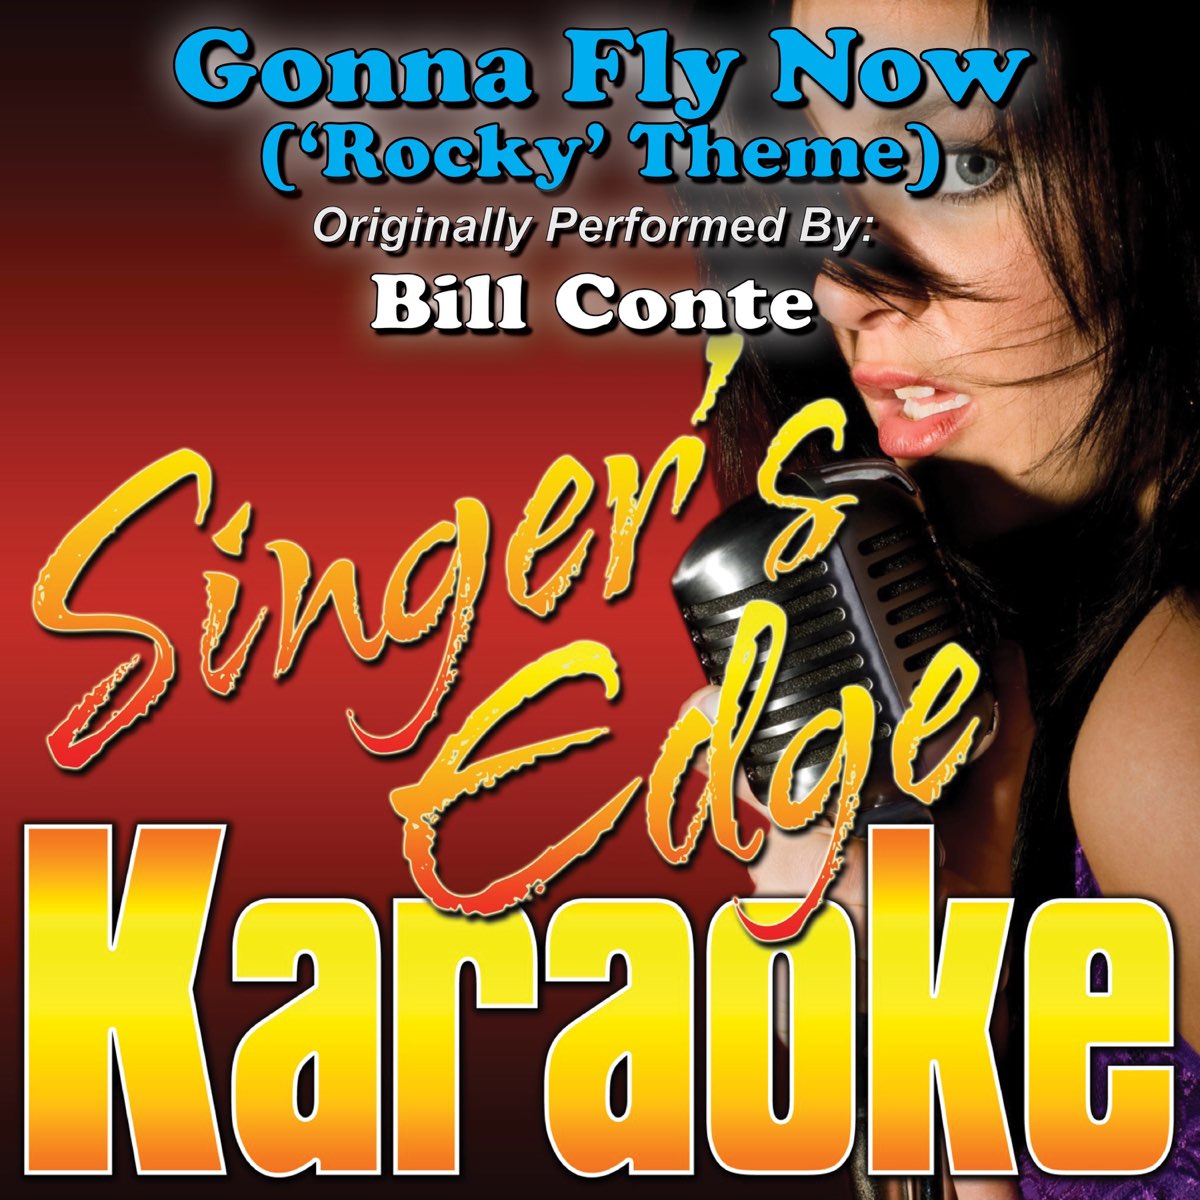 Gonna Fly Now ('Rocky' Theme) [Originally Performed By Bill Conte] [ Instrumental] - Single - Album by Singer's Edge Karaoke - Apple Music